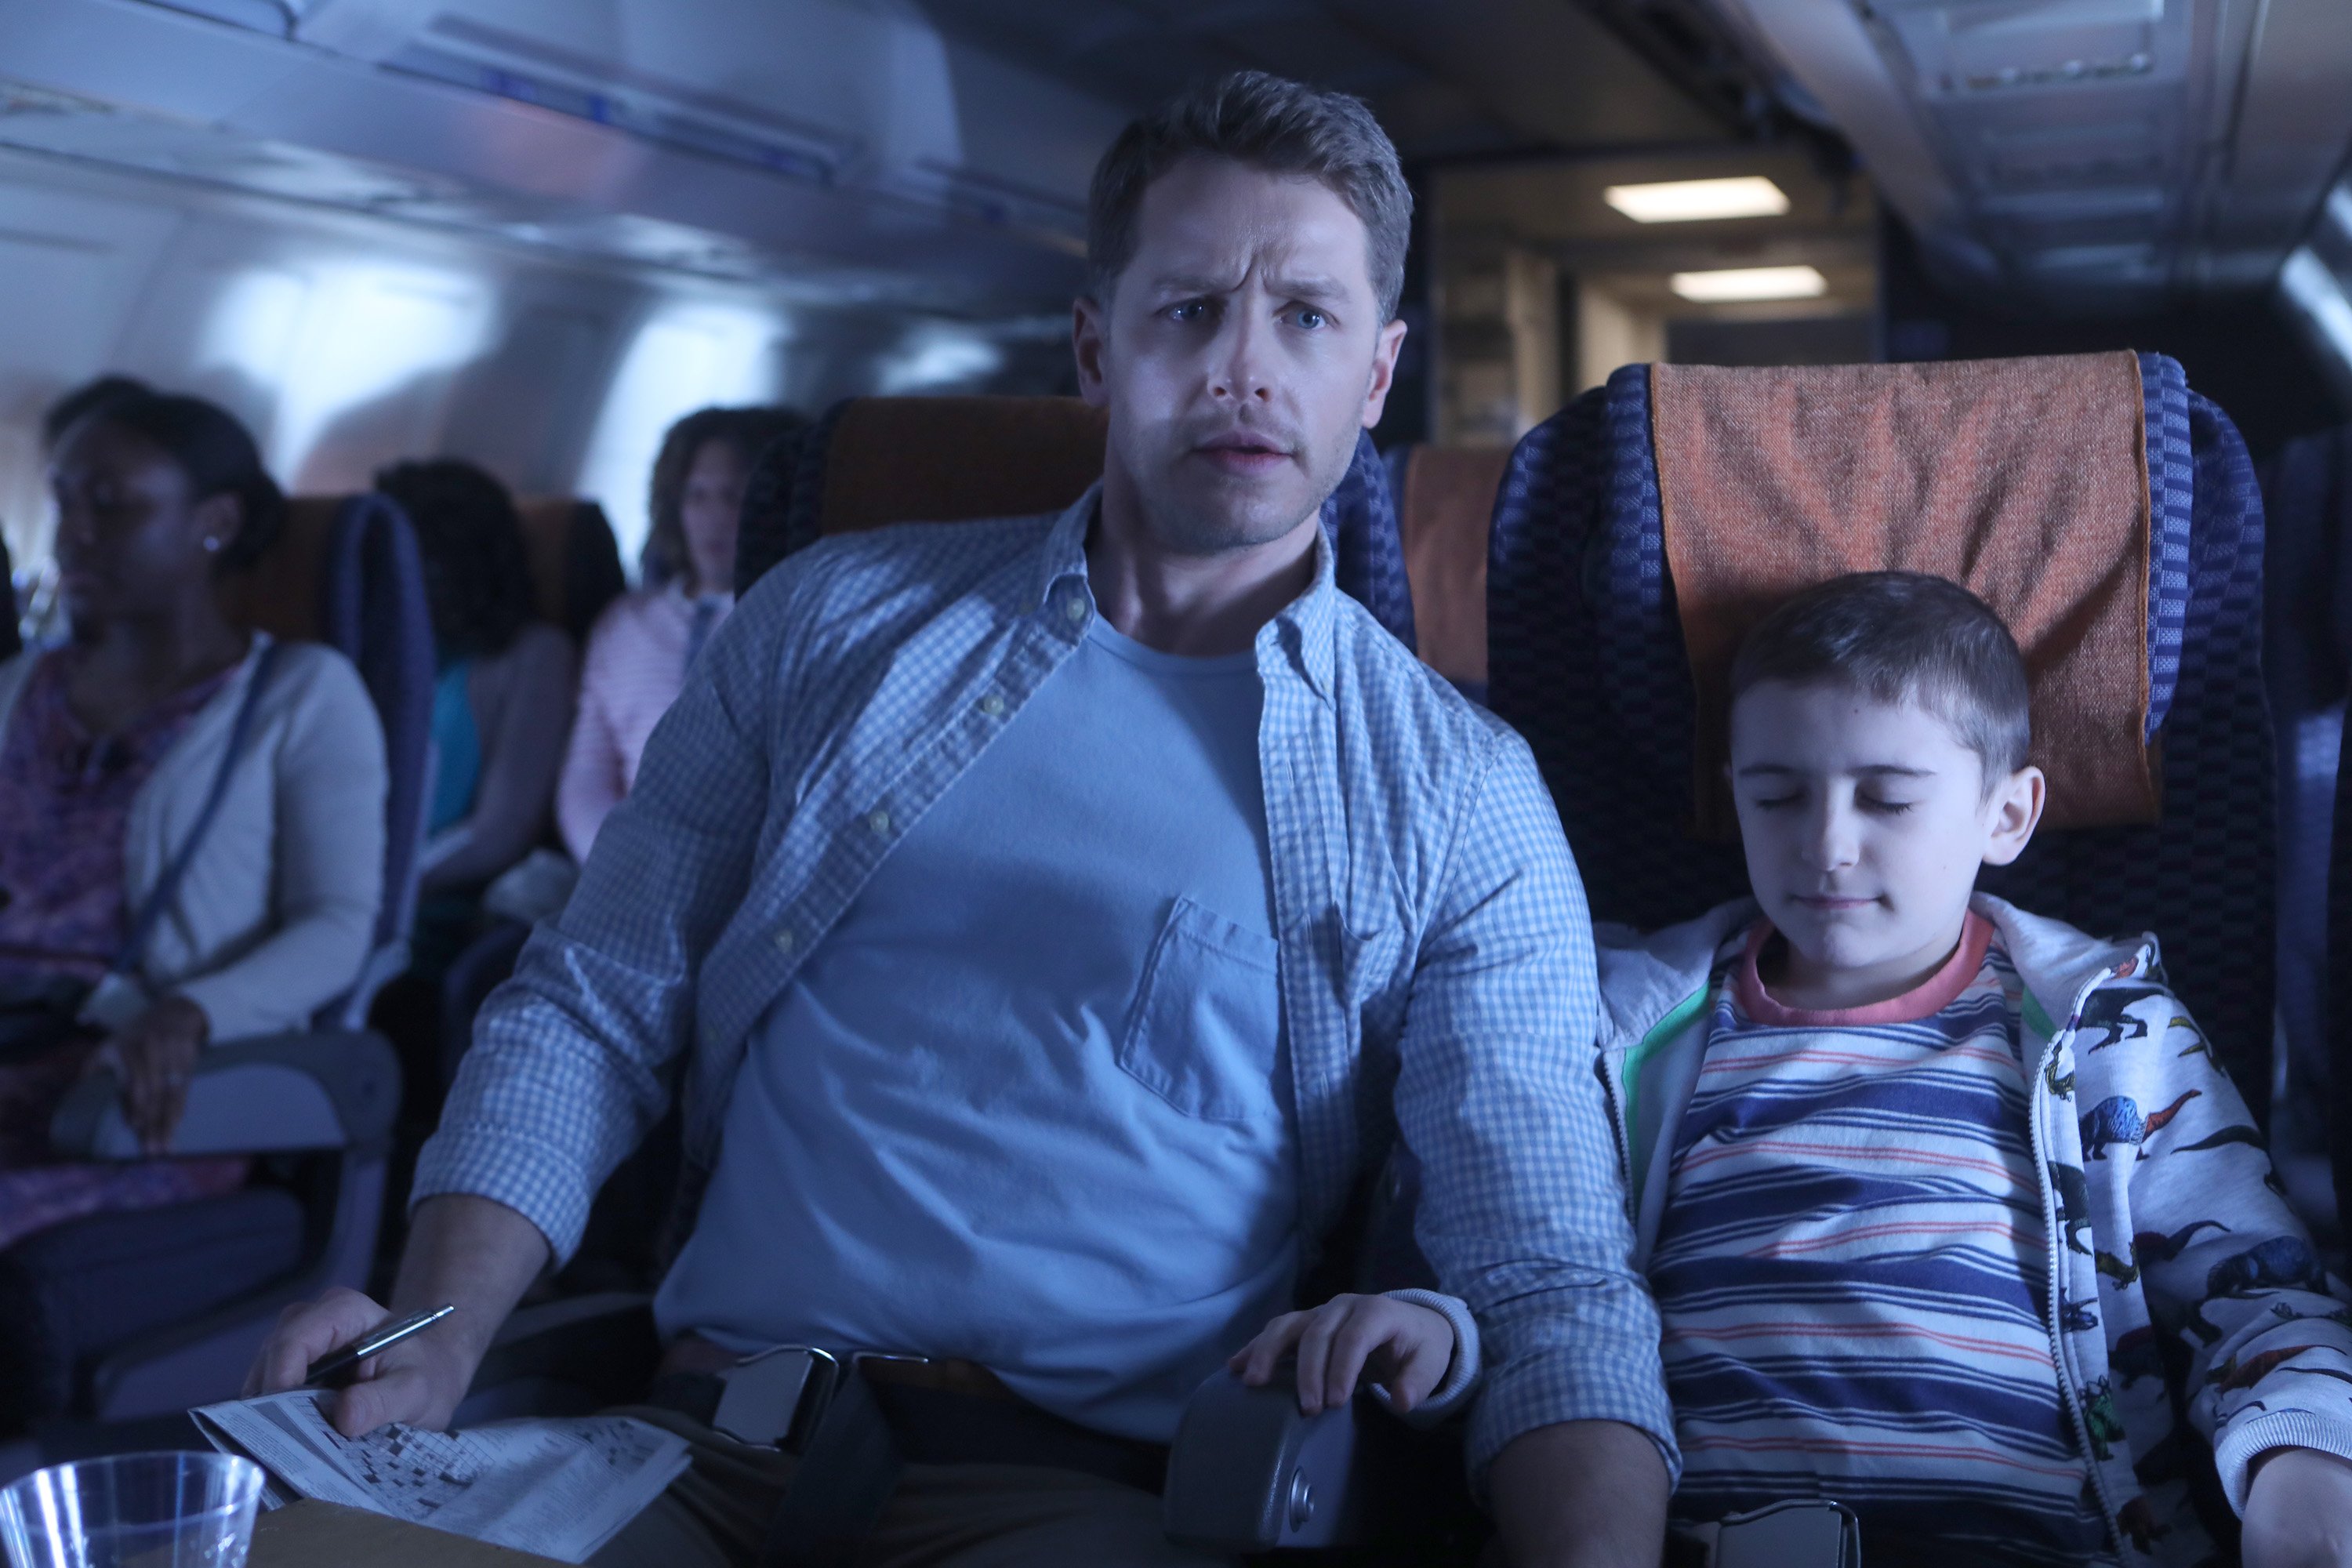 'Manifest' episode titled 'Pilot' featuring Josh Dallas as Ben Stone and Jack Messina as Cal Stone